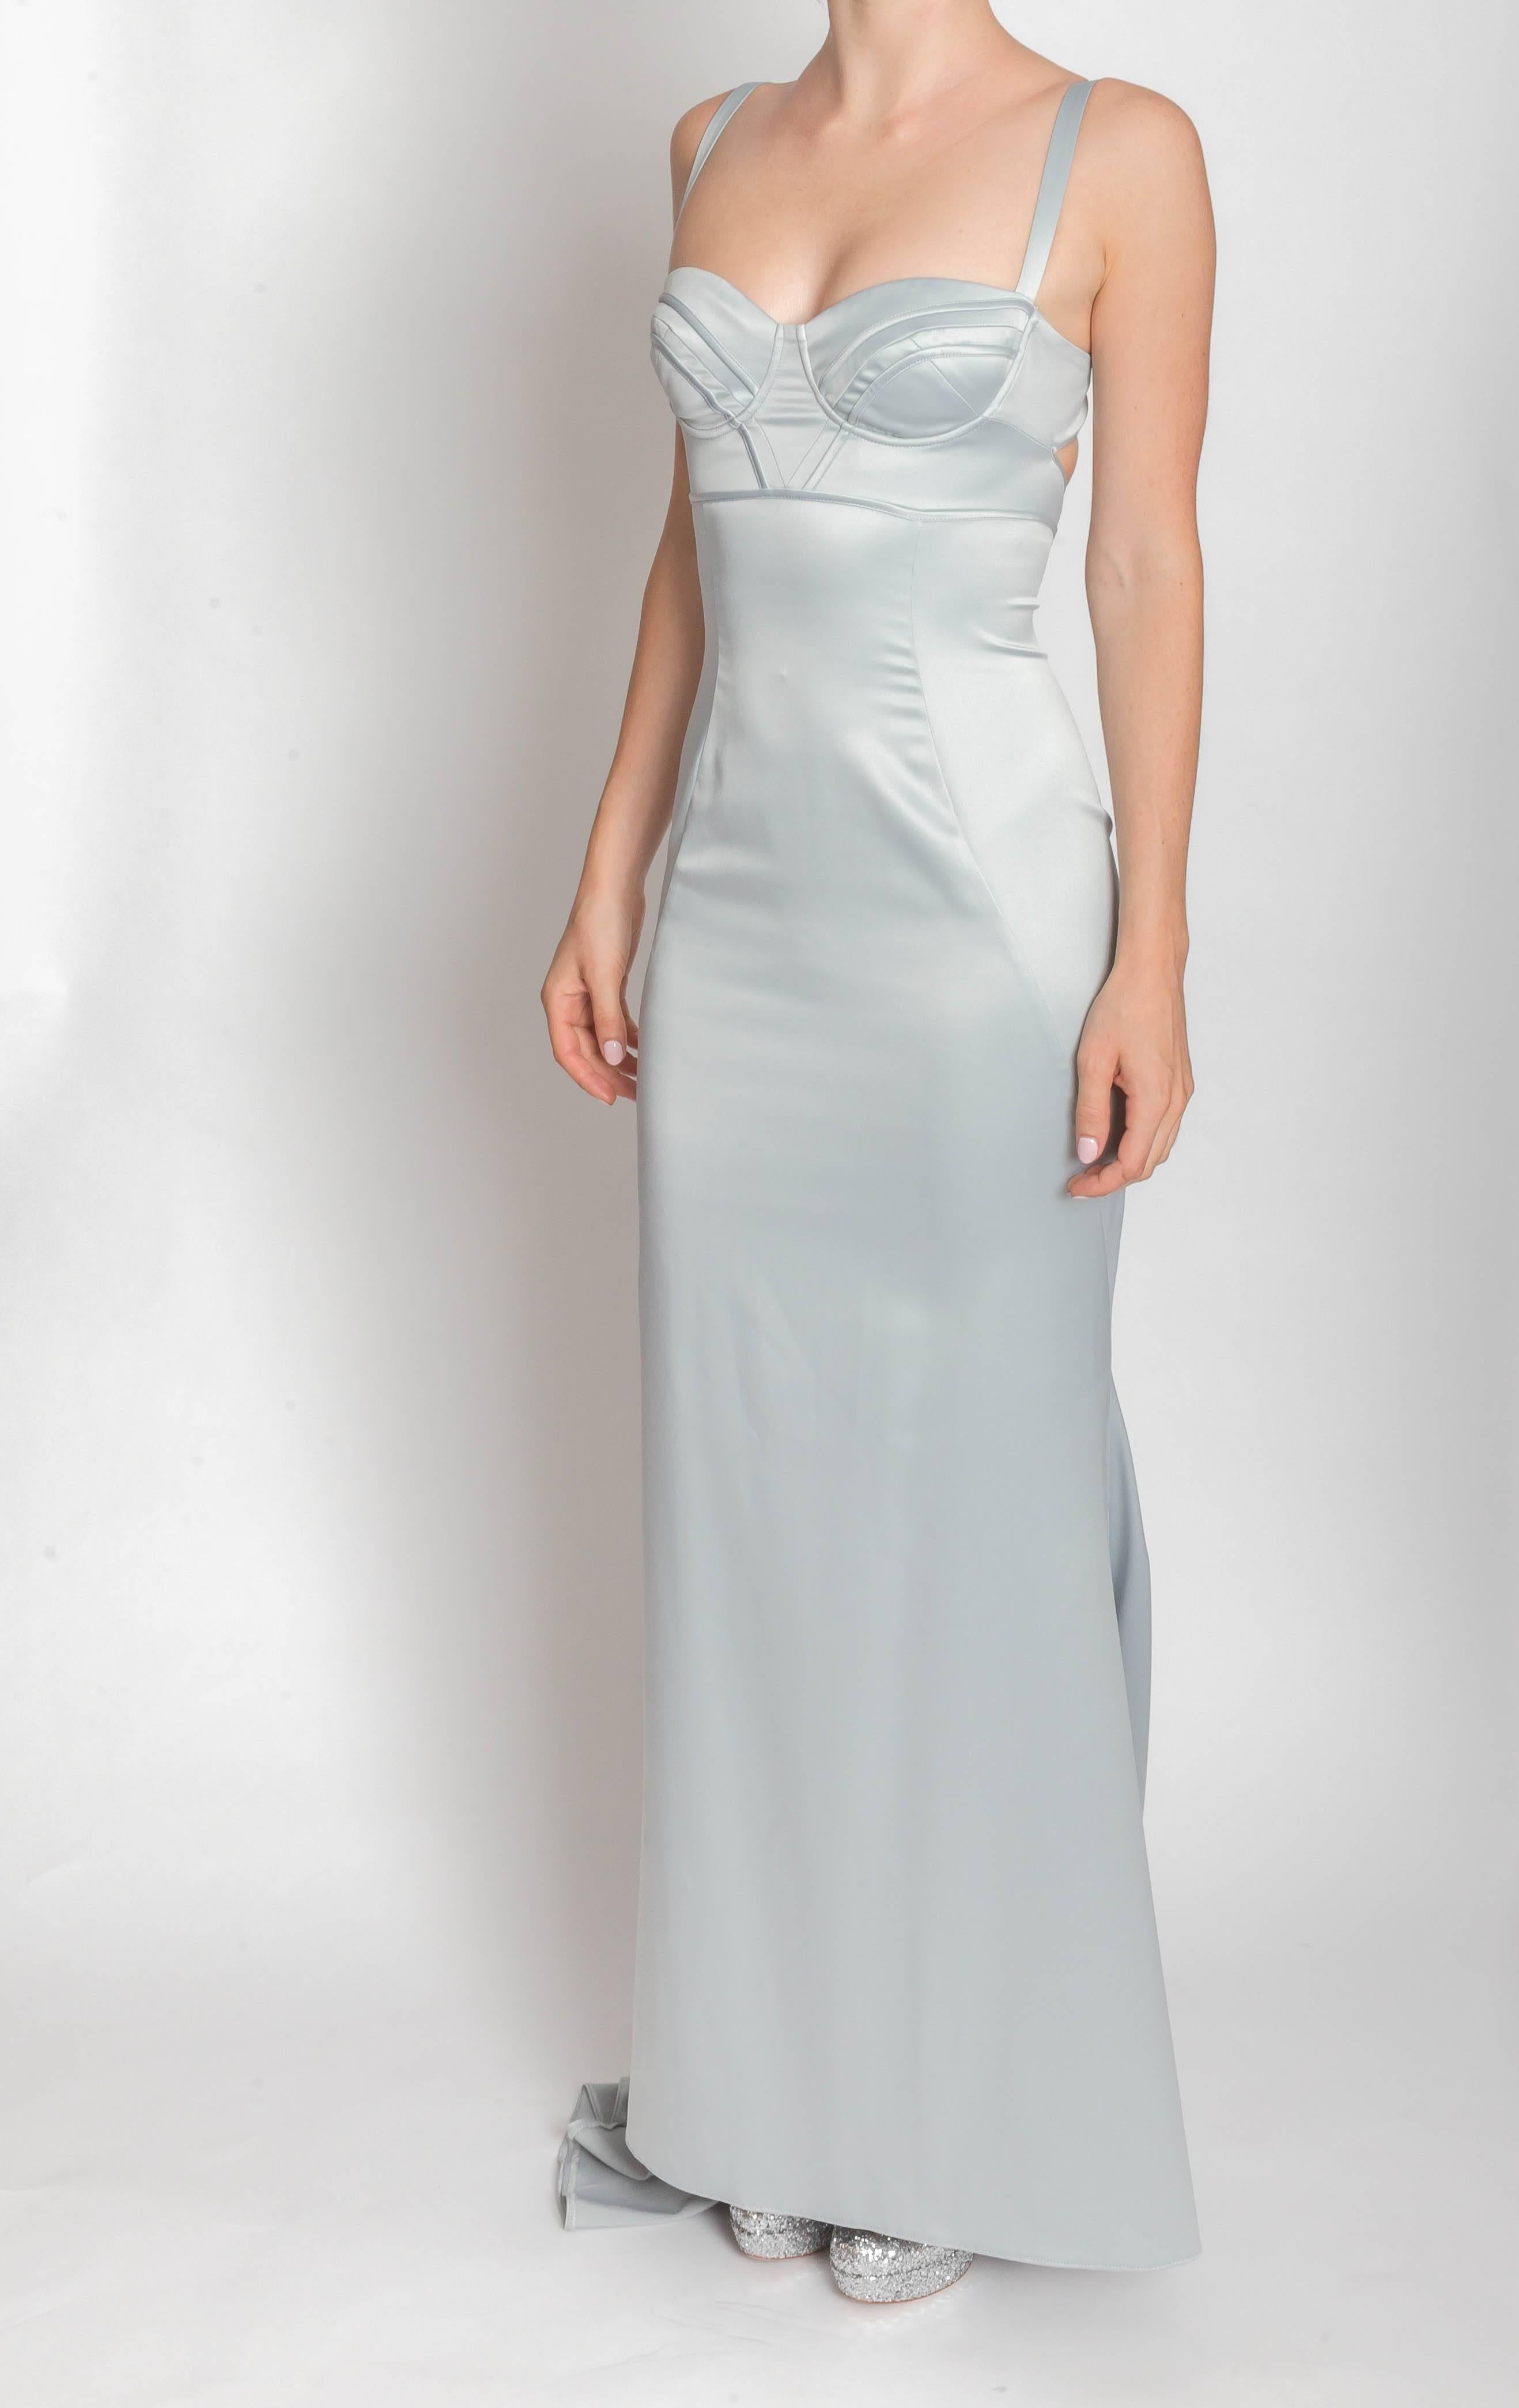 Stunning corset style Roberto Cavalli dress in ice blue.
Open back detail with bra strap style closure to top of key hole.
Zip with Cavalli logo pull to bottom of key hole.
Fishtail hem. 58 inches from shoulder to front hem. 66 inches from shoulder